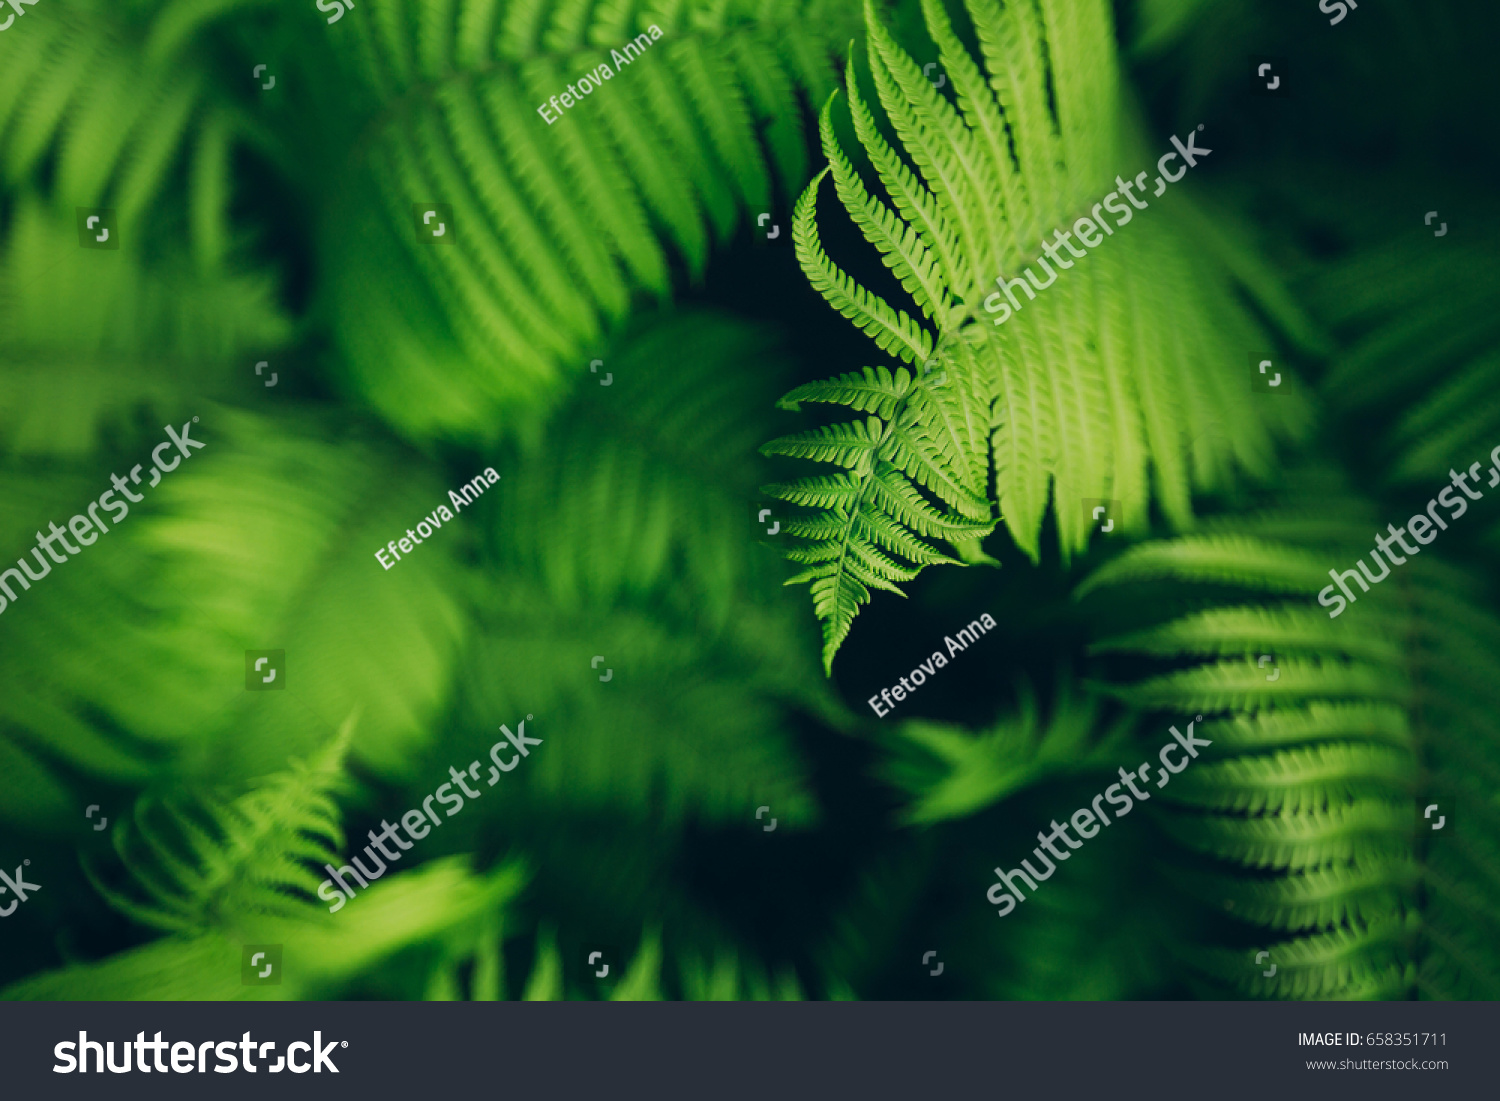 Beautyful ferns leaves green foliage natural floral fern background in sunlight. #658351711